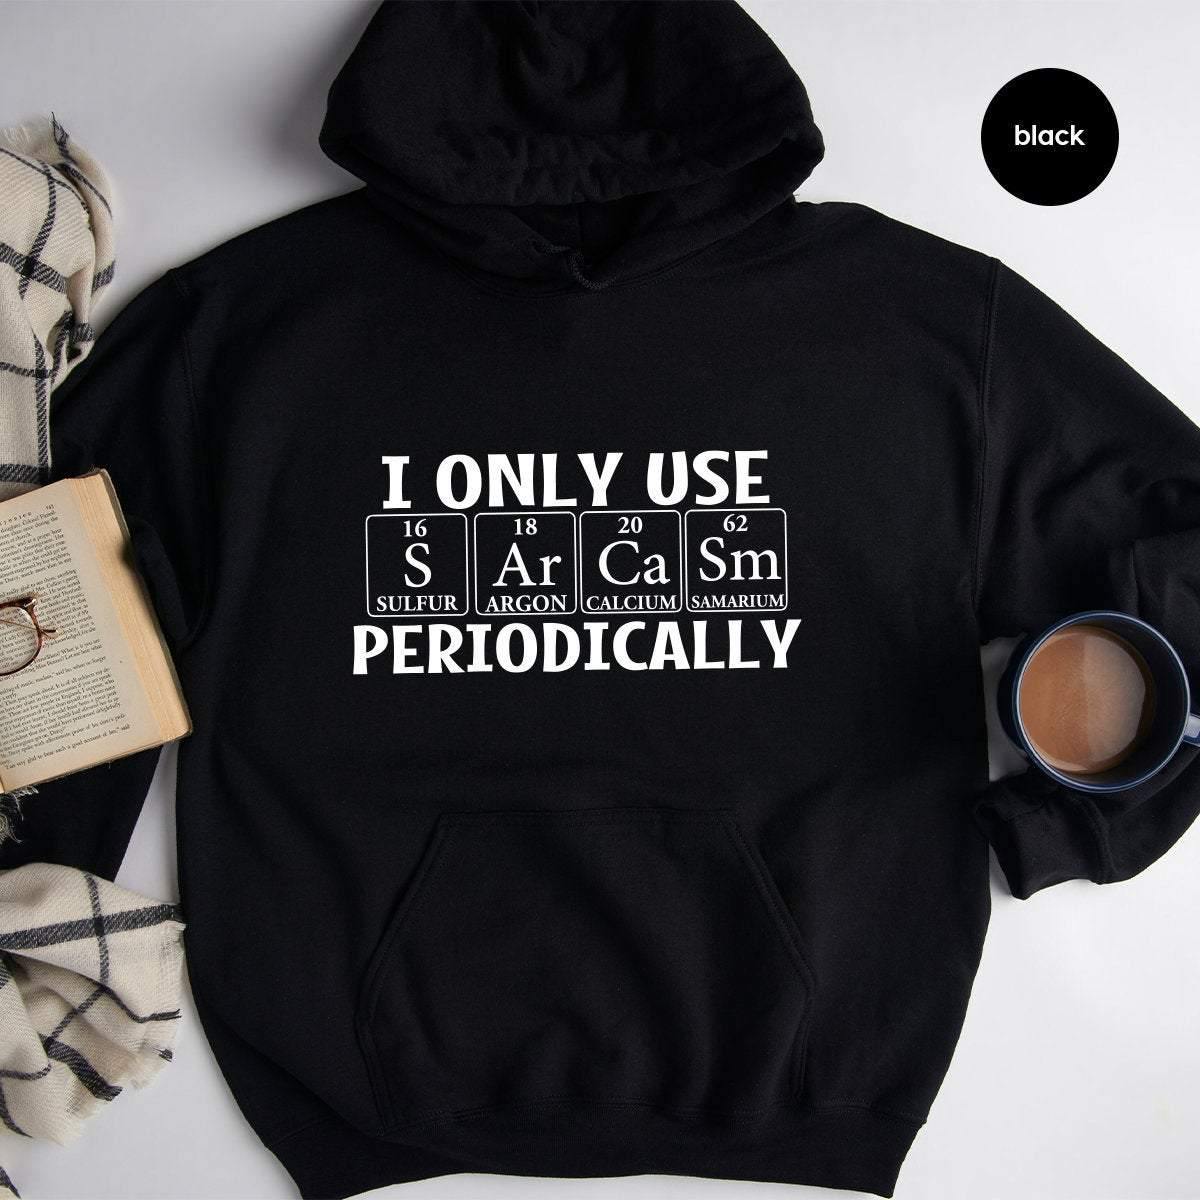 Sarcastic Hoodie, I Only Use Sarcasm Periodically Hoodie, Funny Chemistry Hoodie, Funny Science Hoodie, Sarcastic Chemistry Hoodie - Fastdeliverytees.com